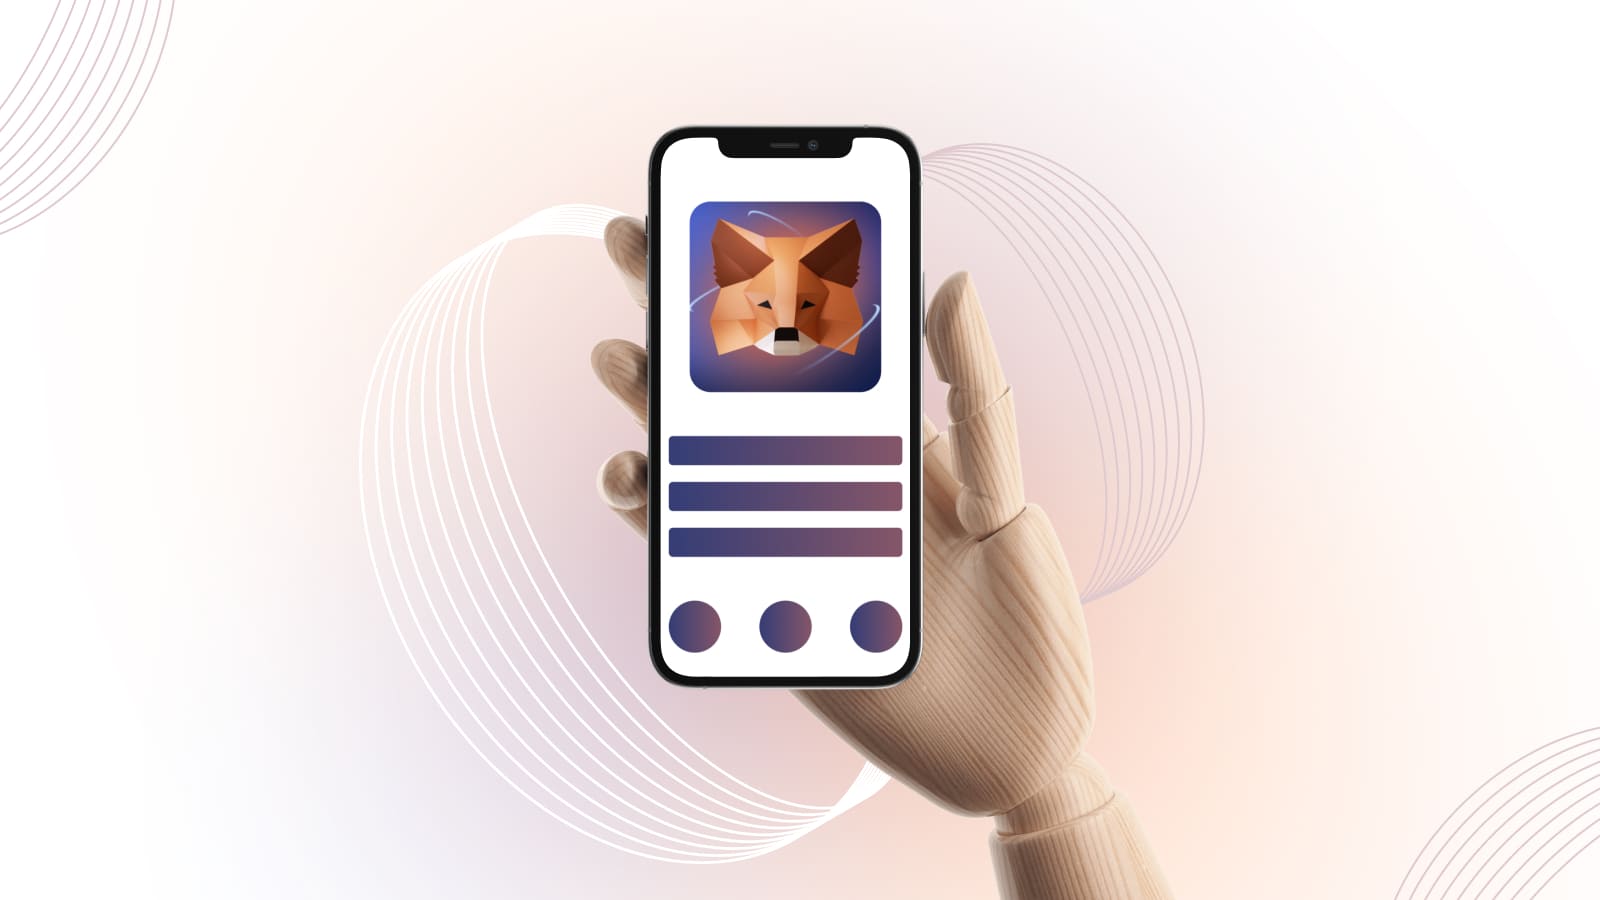 Release of MetaMask app in 2020 enabled mobile transactions and app interactions.